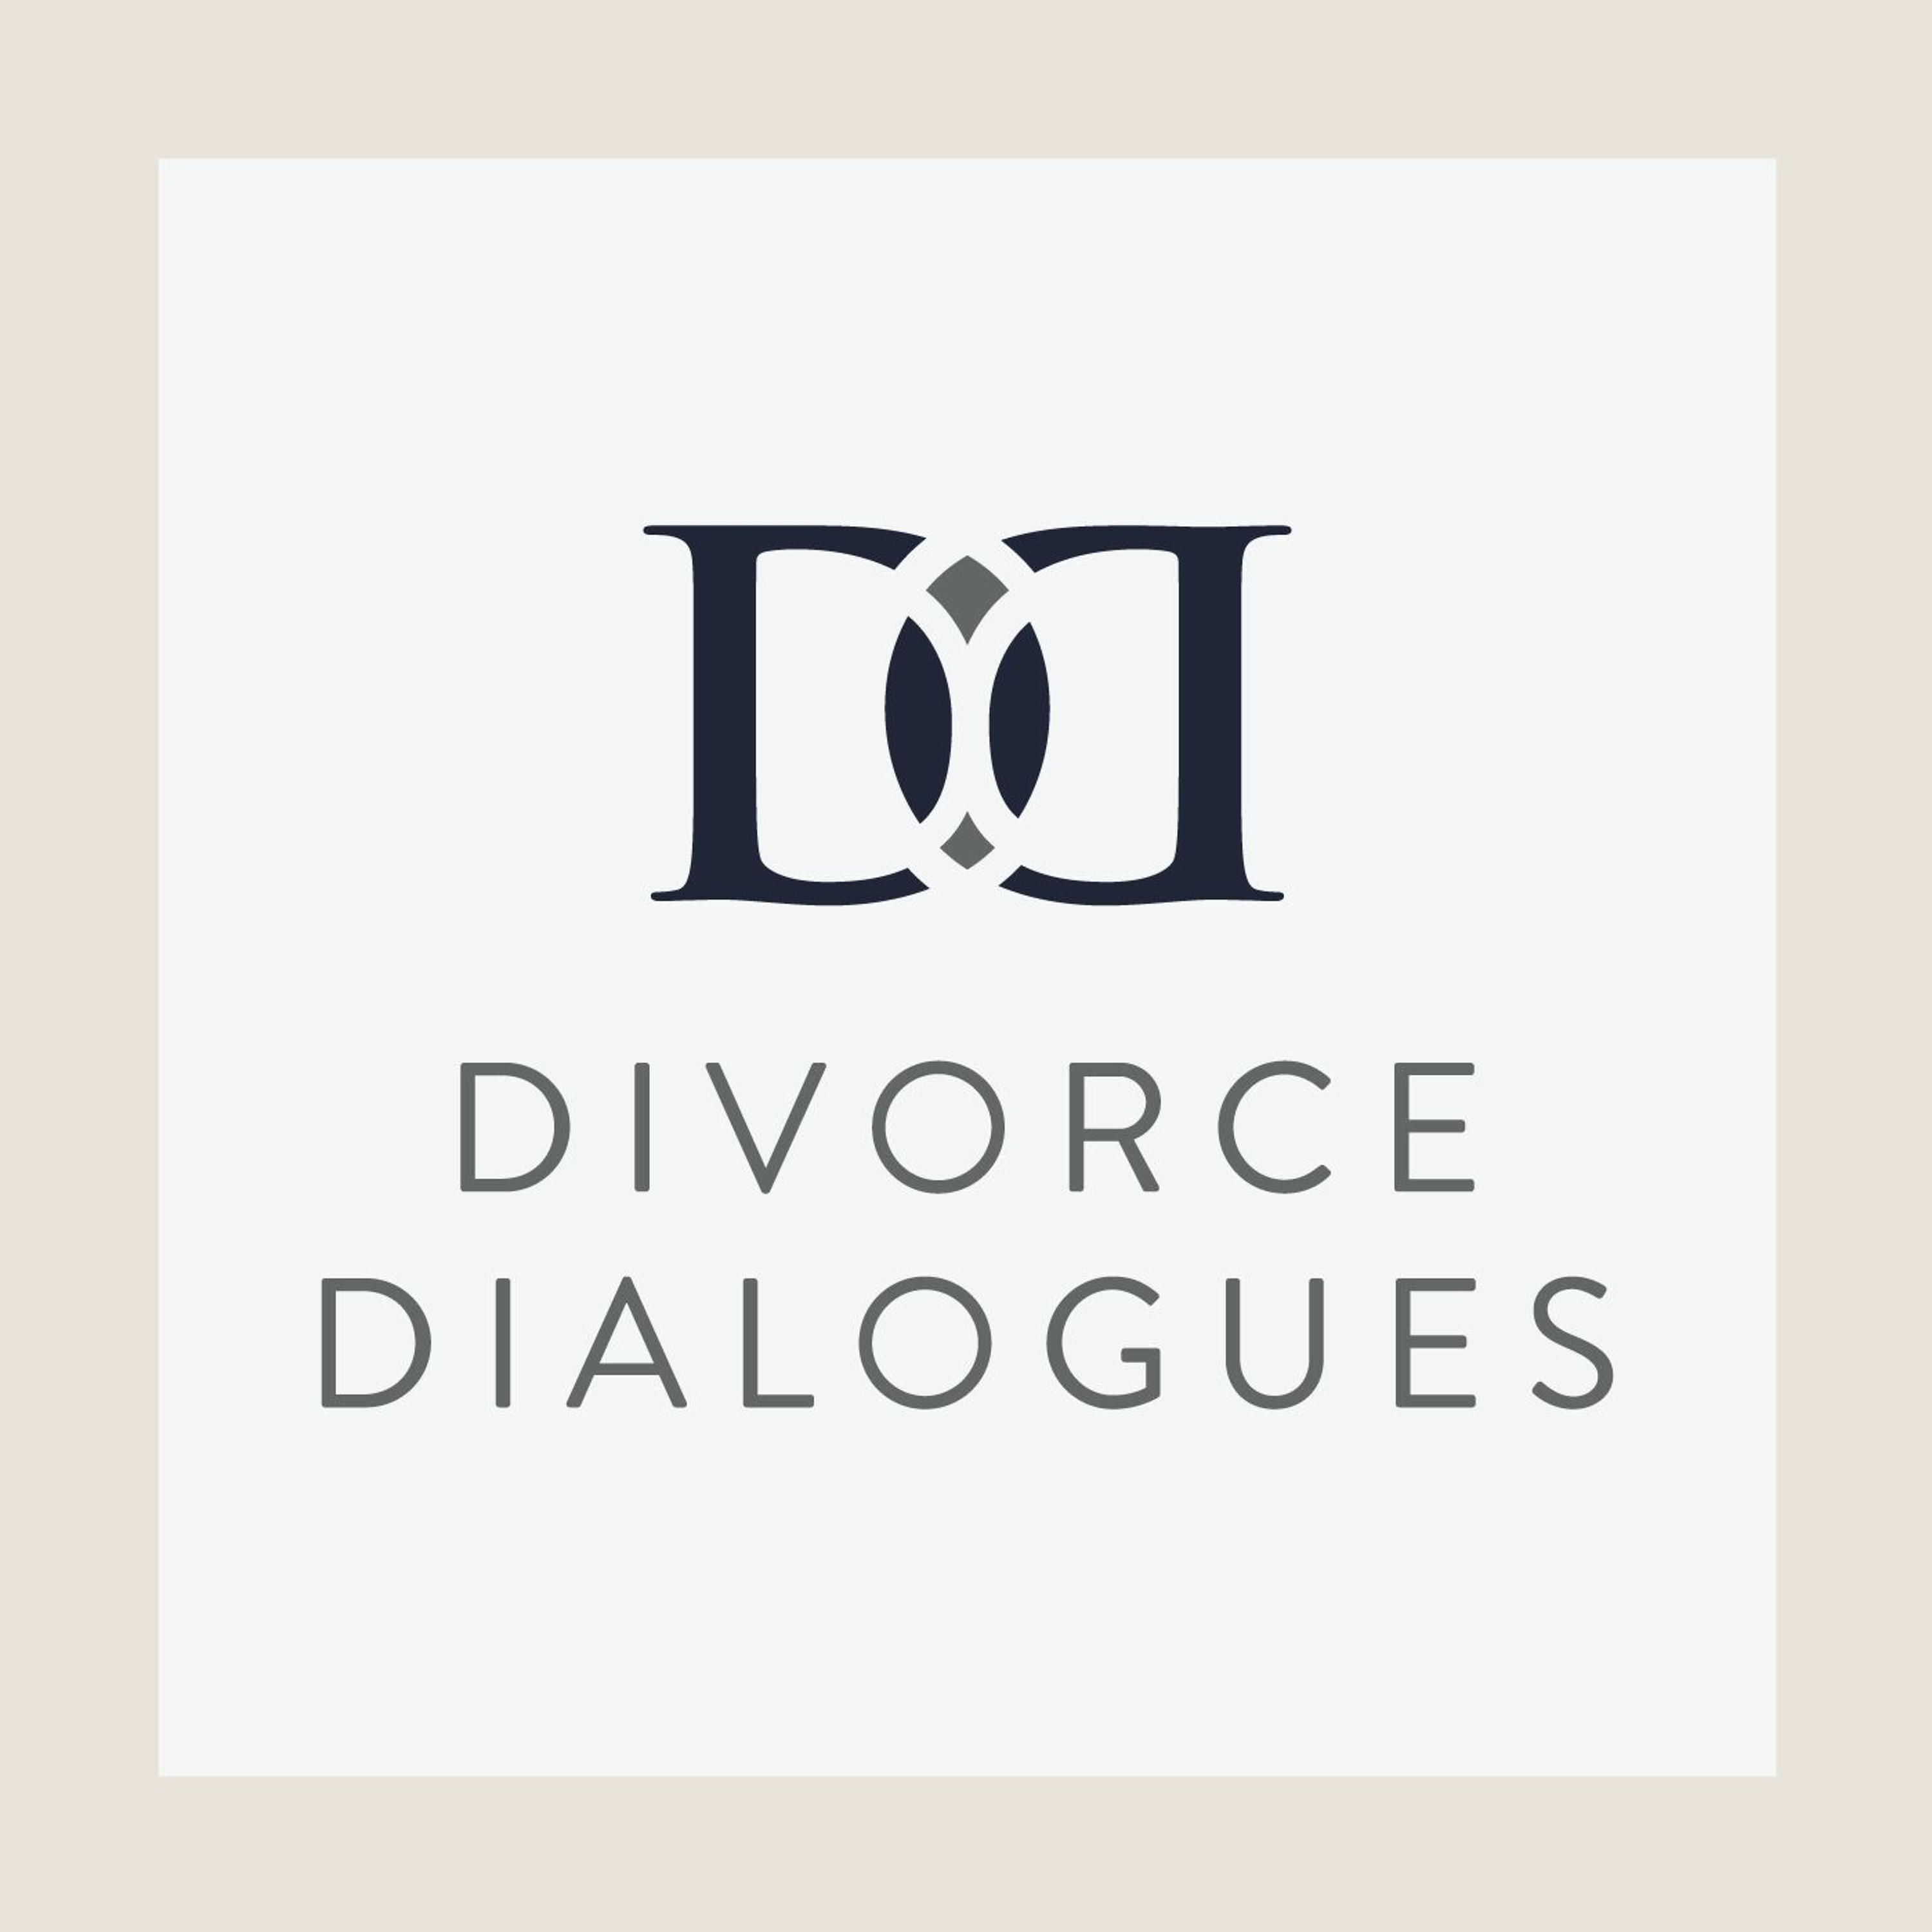 Divorce Dialogues - Divorcing a Narcissist in Mediation With Brian James